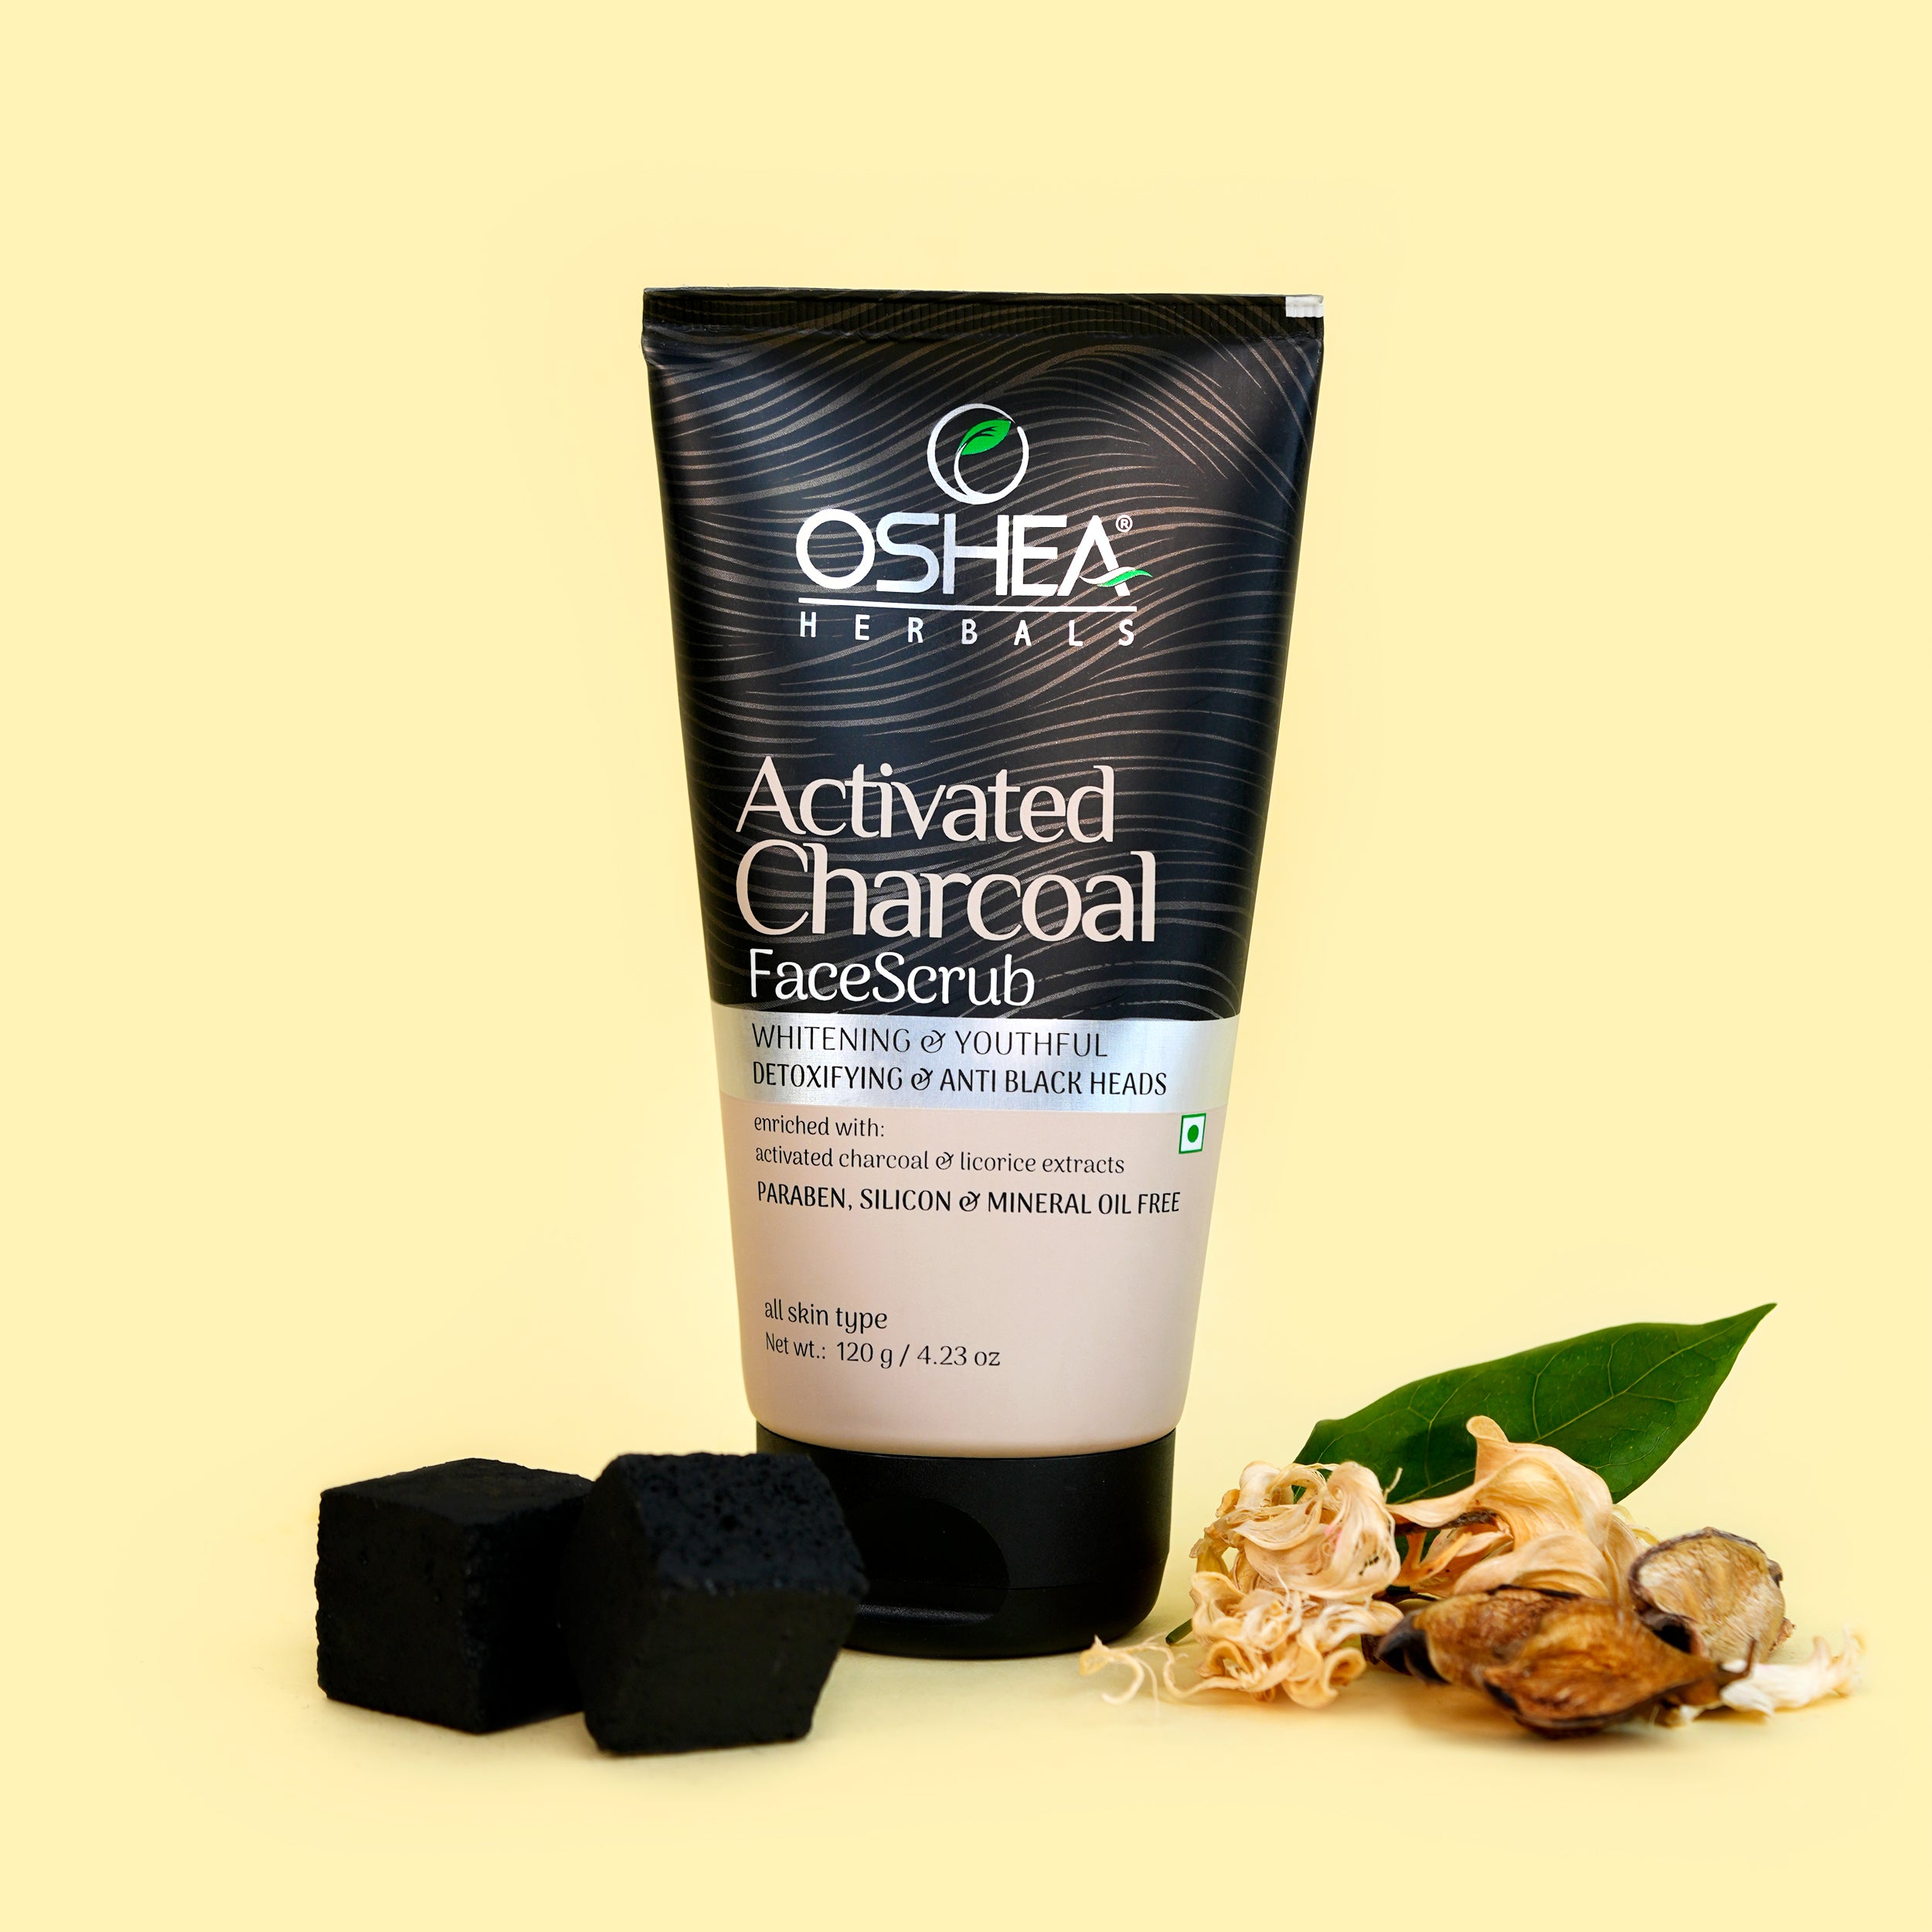 Activated Charcoal Face Scrub Oshea Herbals